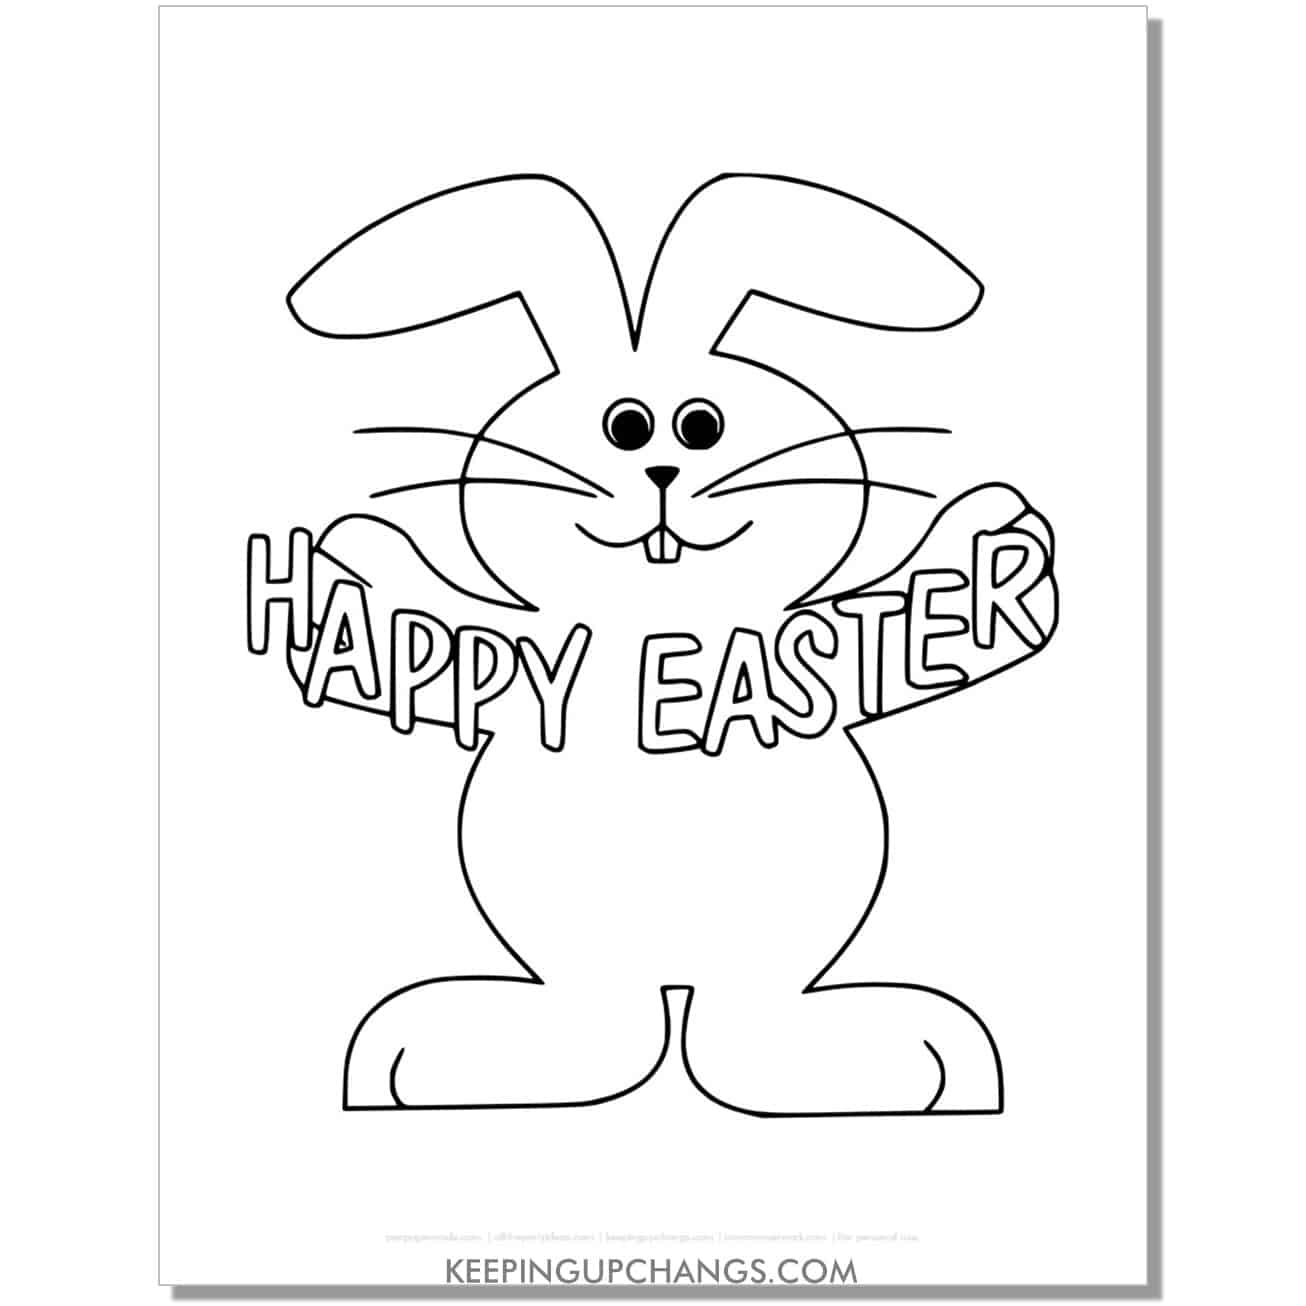 happy easter bunny holding banner coloring page, sheet.